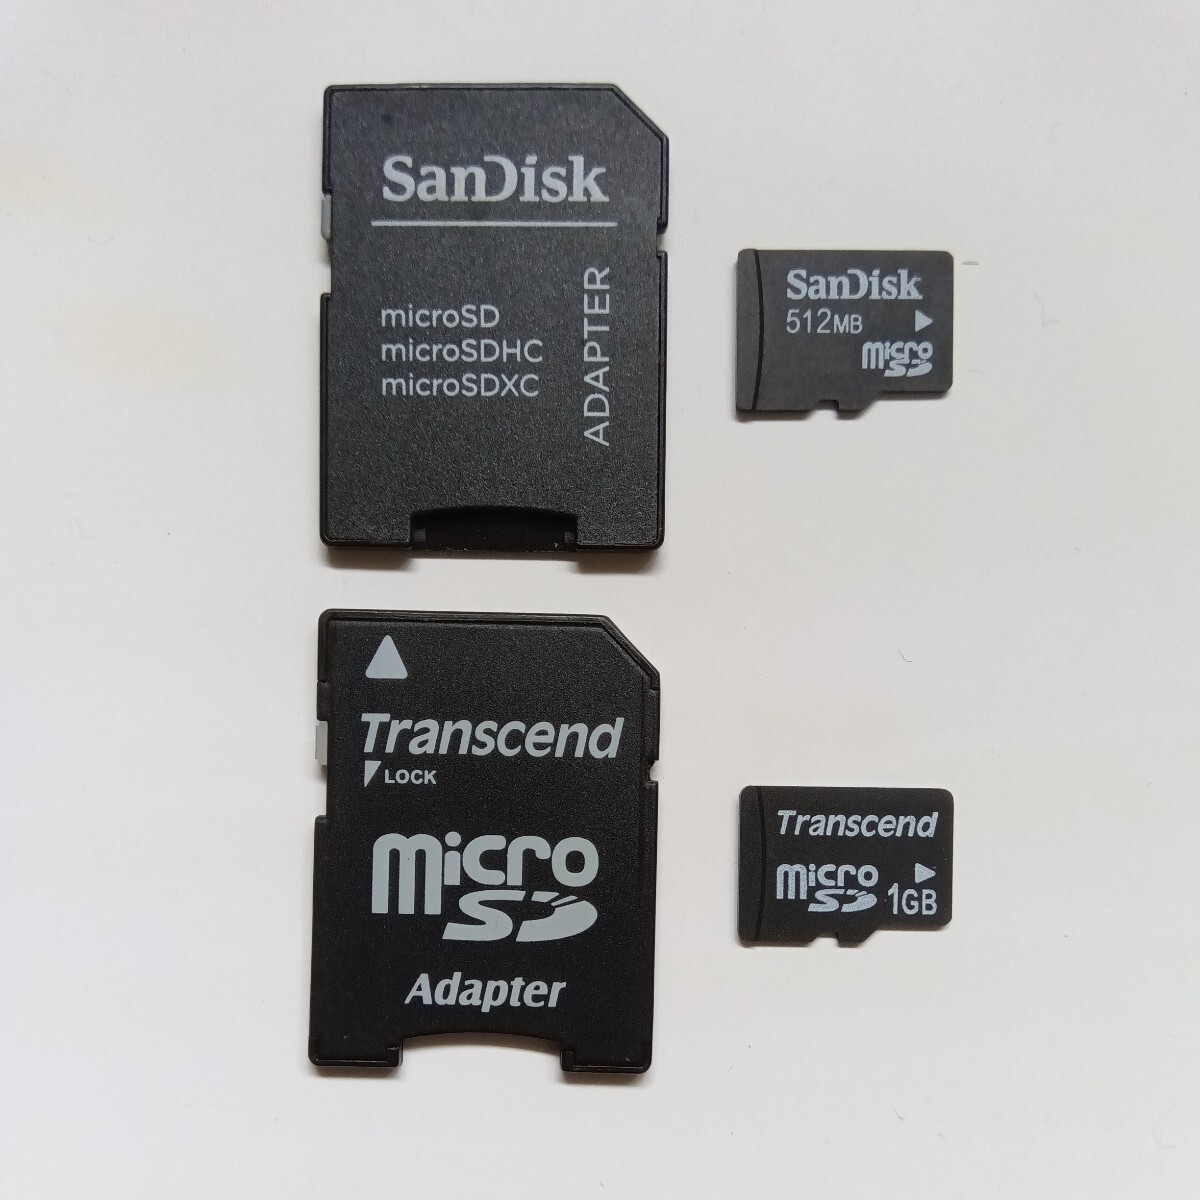  free shipping * SD adaptor attaching microSD Transcend Sandisk 1GB 512MB Taiwan made made in China used 2 set Adapter record medium 